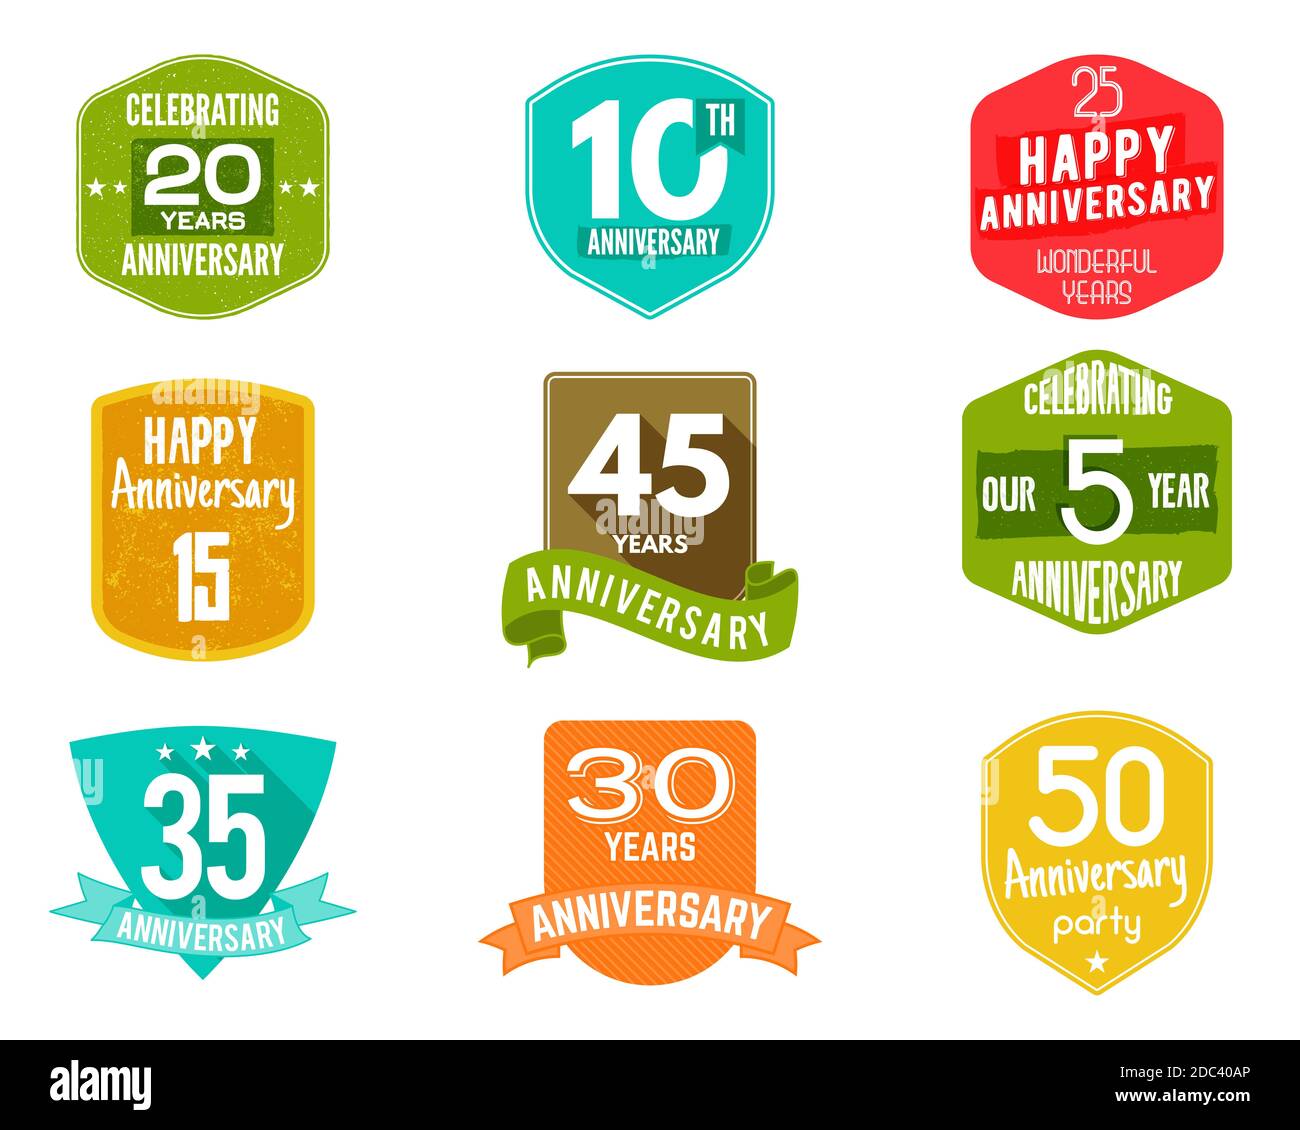 Anniversary badges, signs and emblems collection in different style - retro design, flat. Easy to edit and use your number, text. illustration isolate Stock Photo